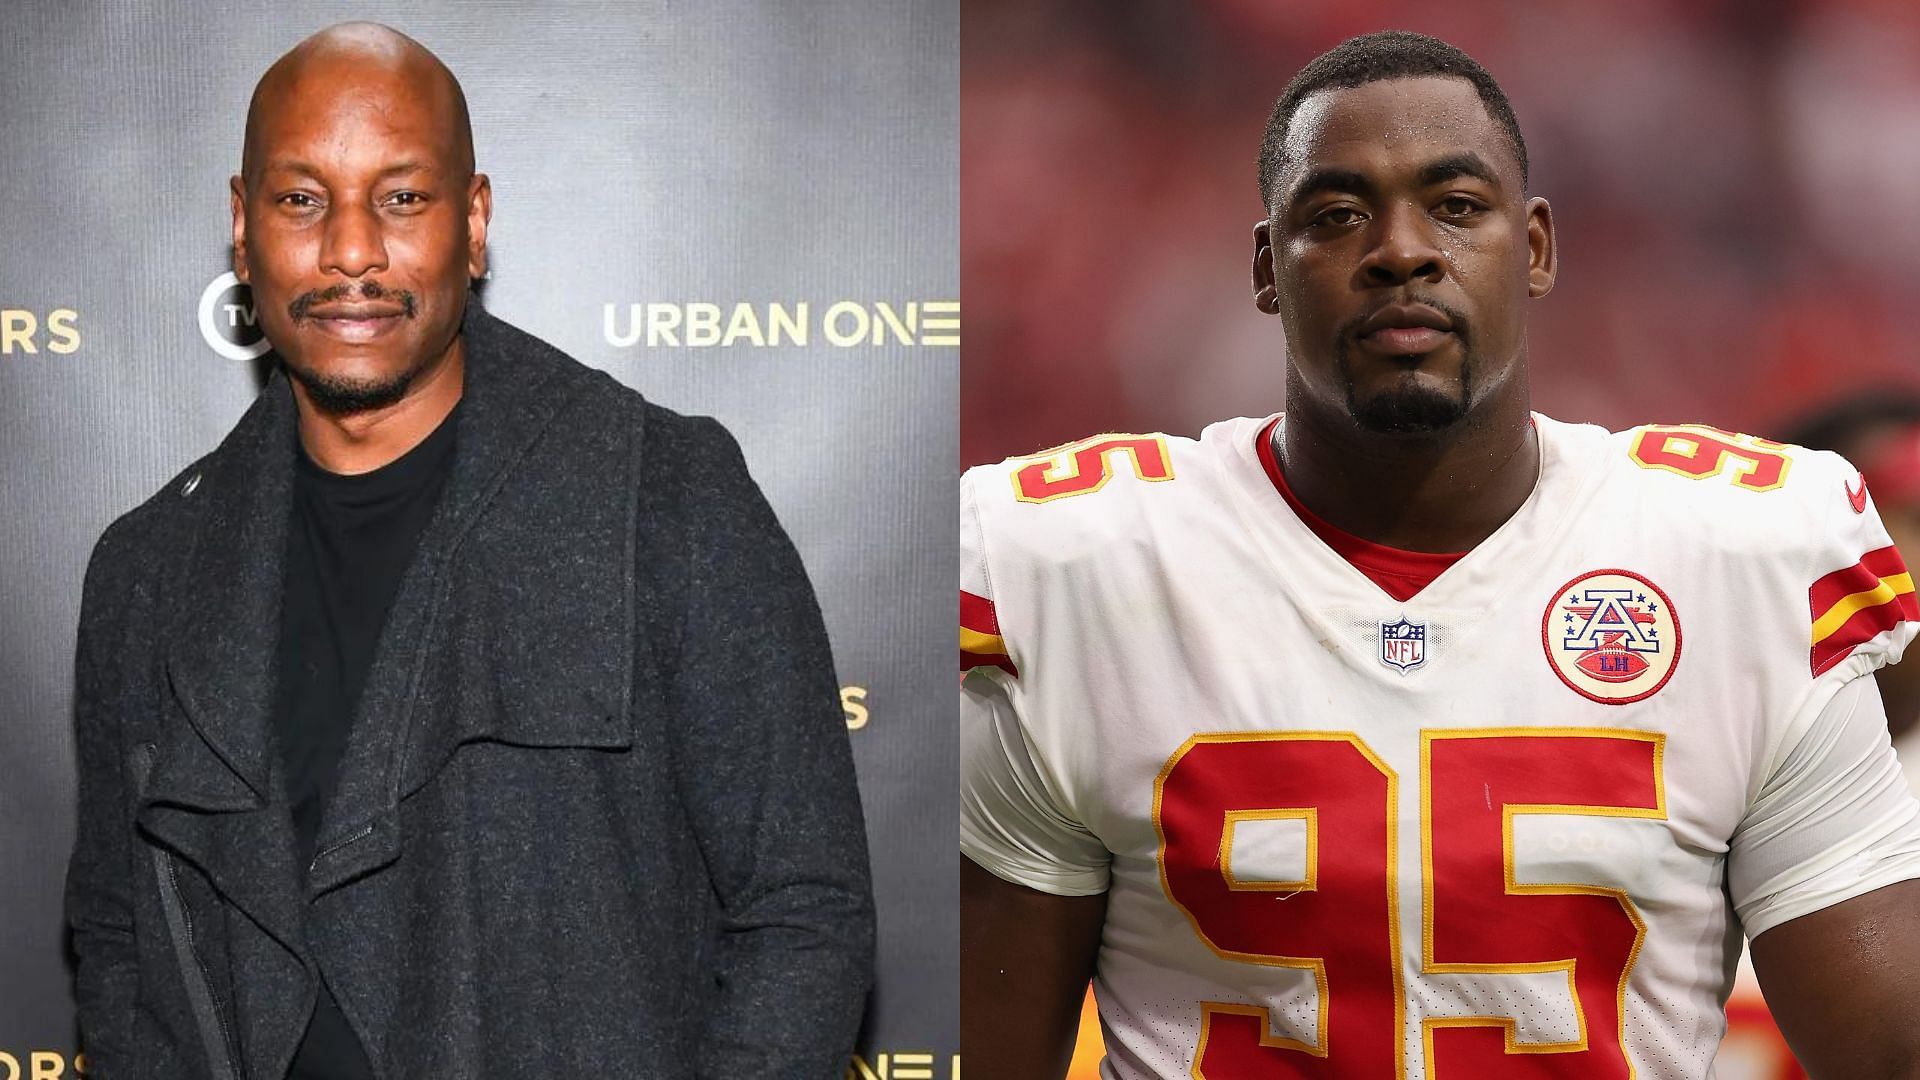 Fast &amp; The Furious actor Tyrese Gibson (L) comments on photo that includes Chiefs DT Chris Jones (R)